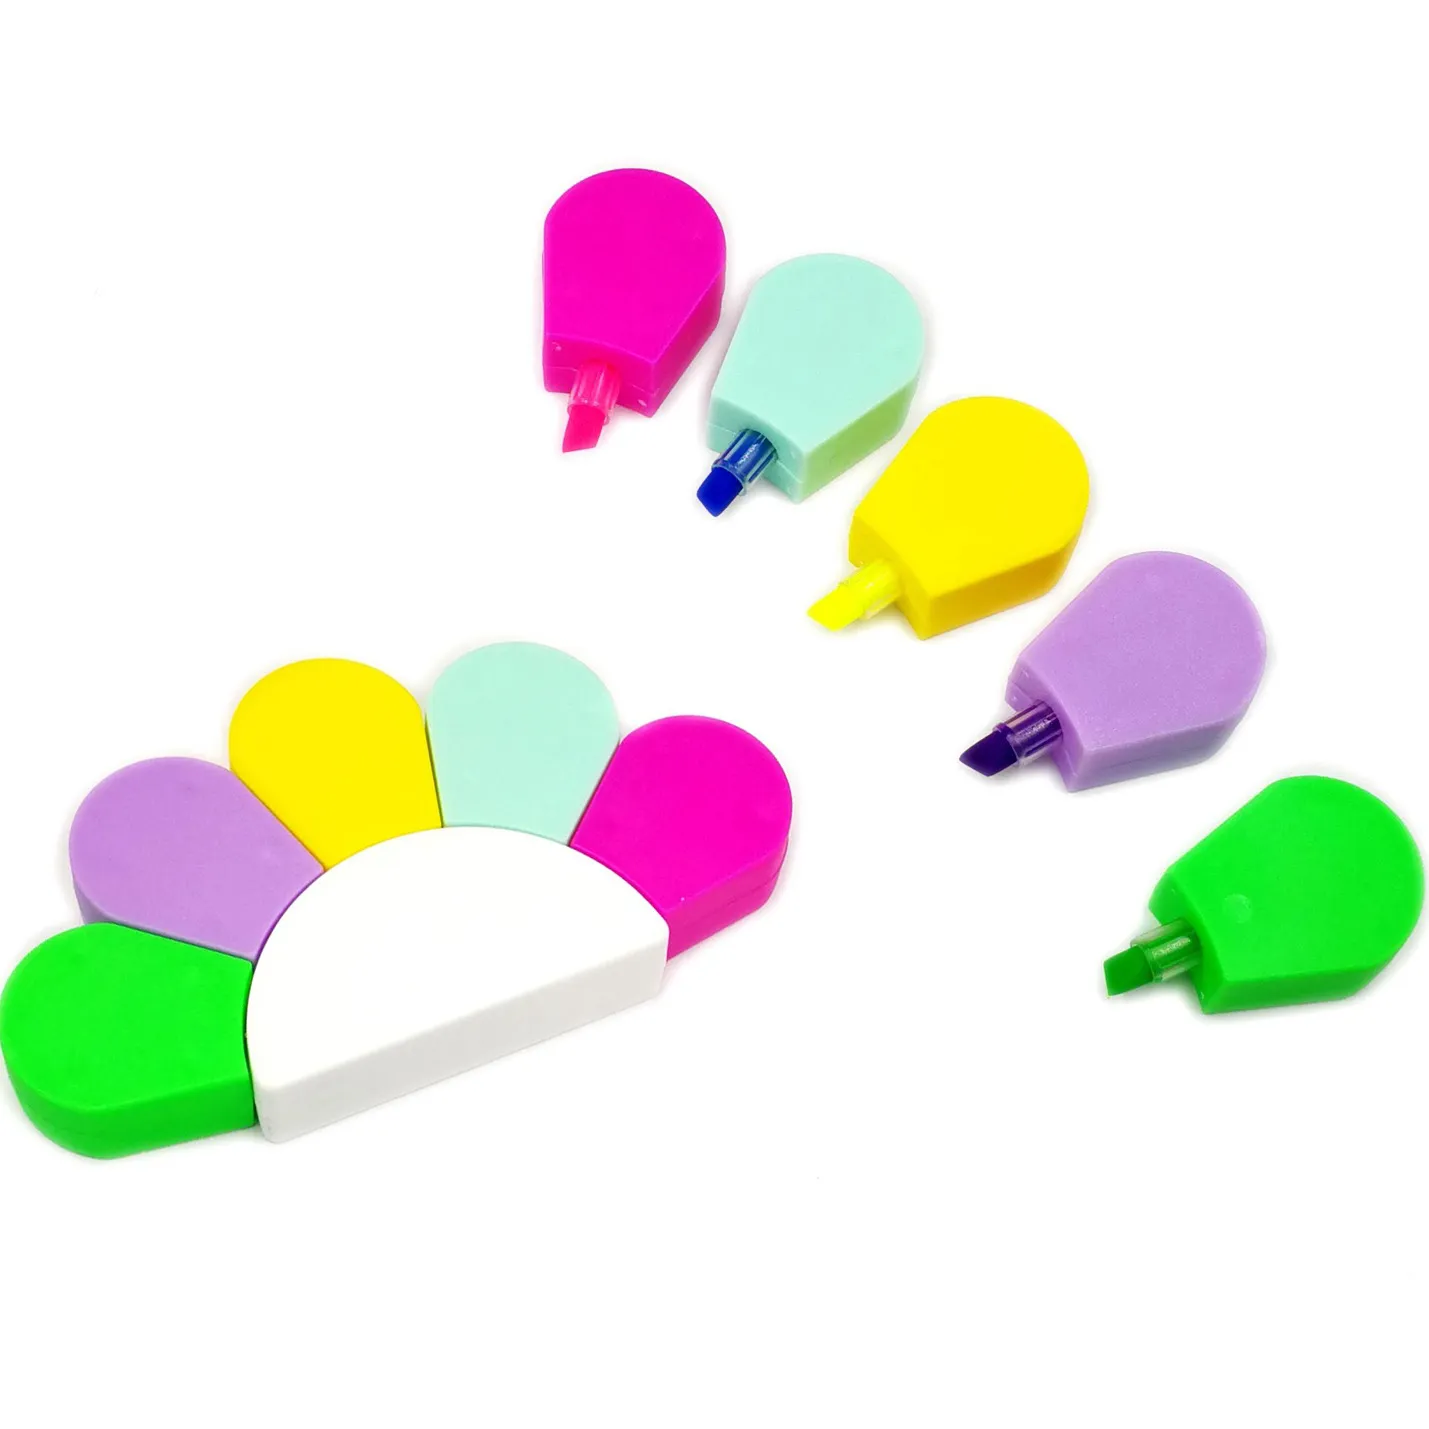 Promotional cute design 5 in 1 highlighters markers with logo printing in semicircle as promotional gift